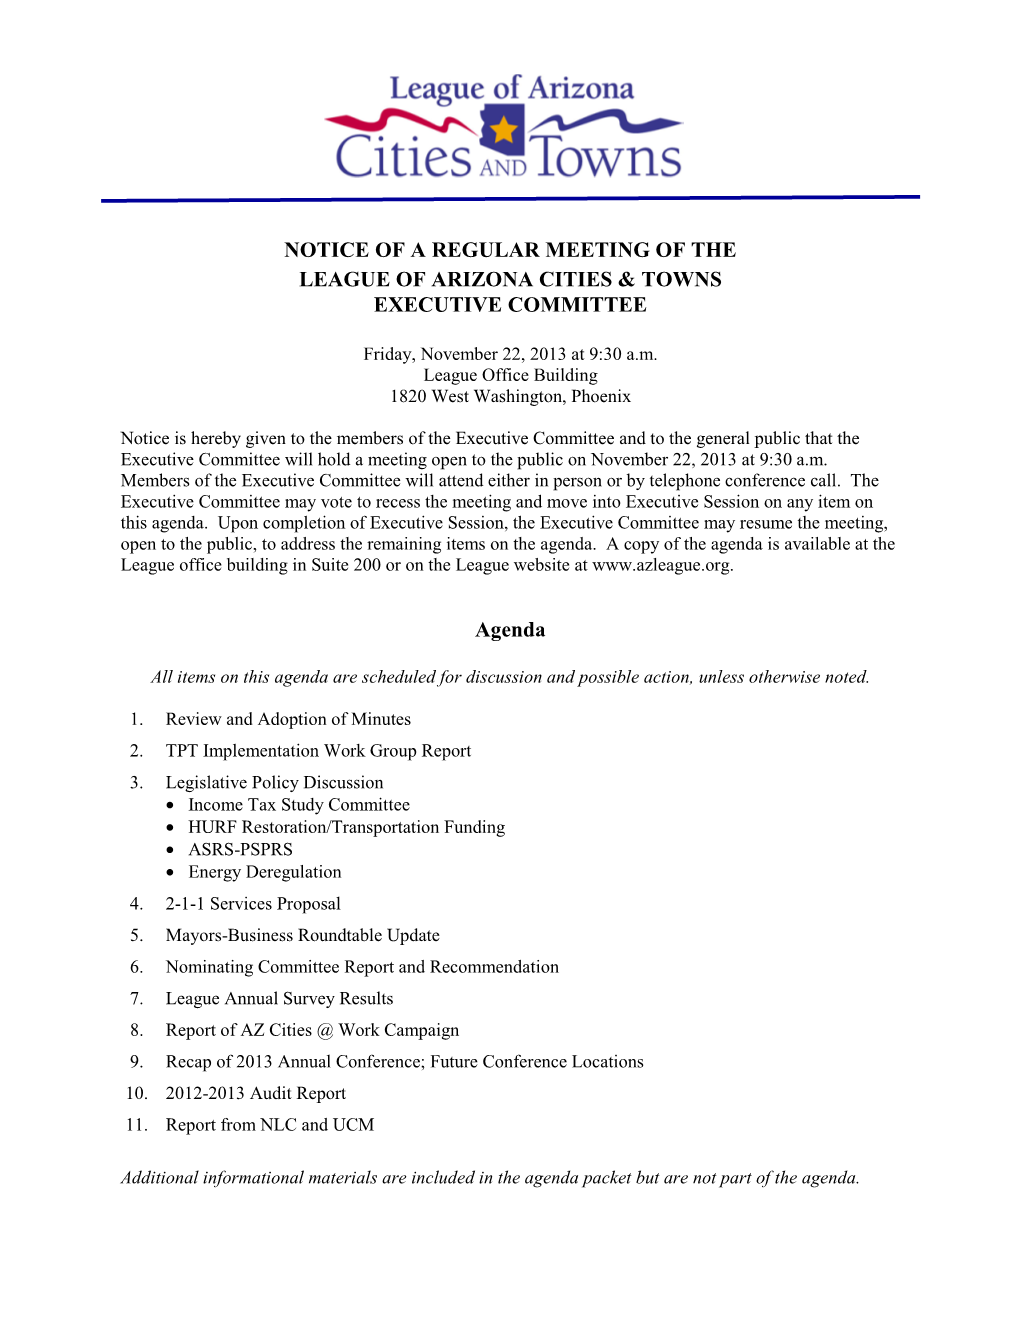 Notice of a Regular Meeting of the League of Arizona Cities & Towns Executive Committee